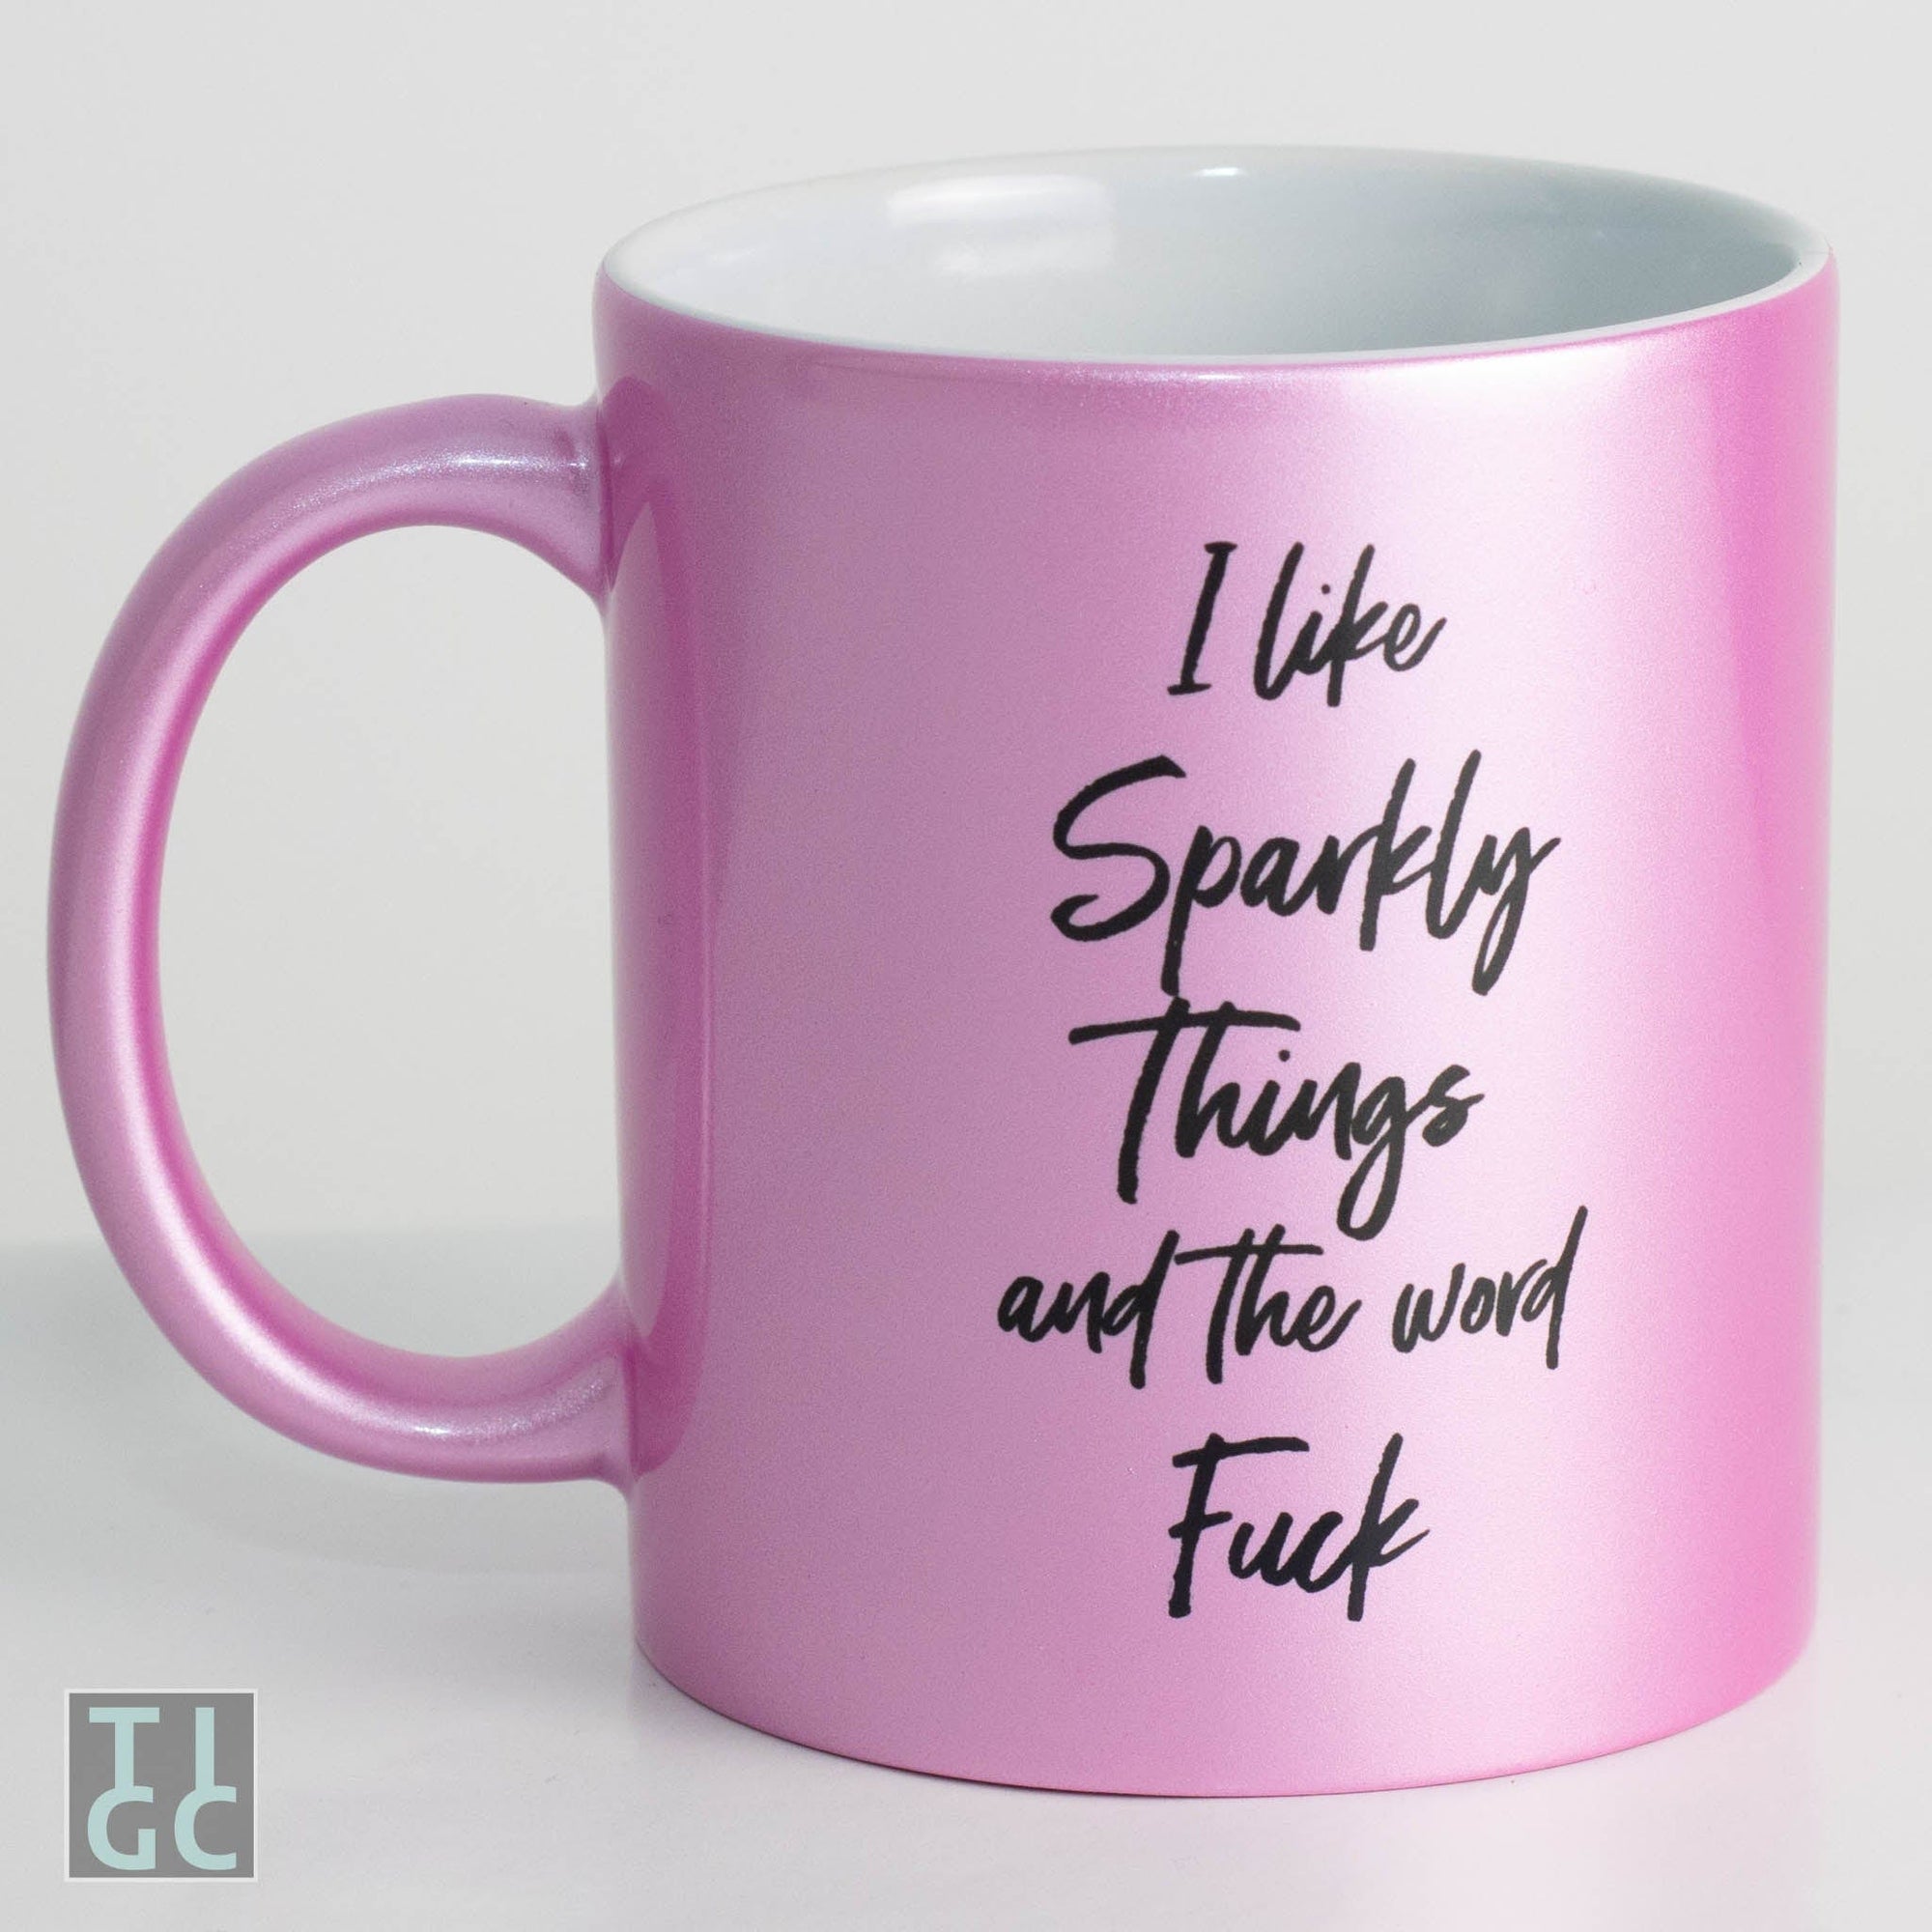 TIGC The Inappropriate Gift Co I like sparkly things and the word fuck mug